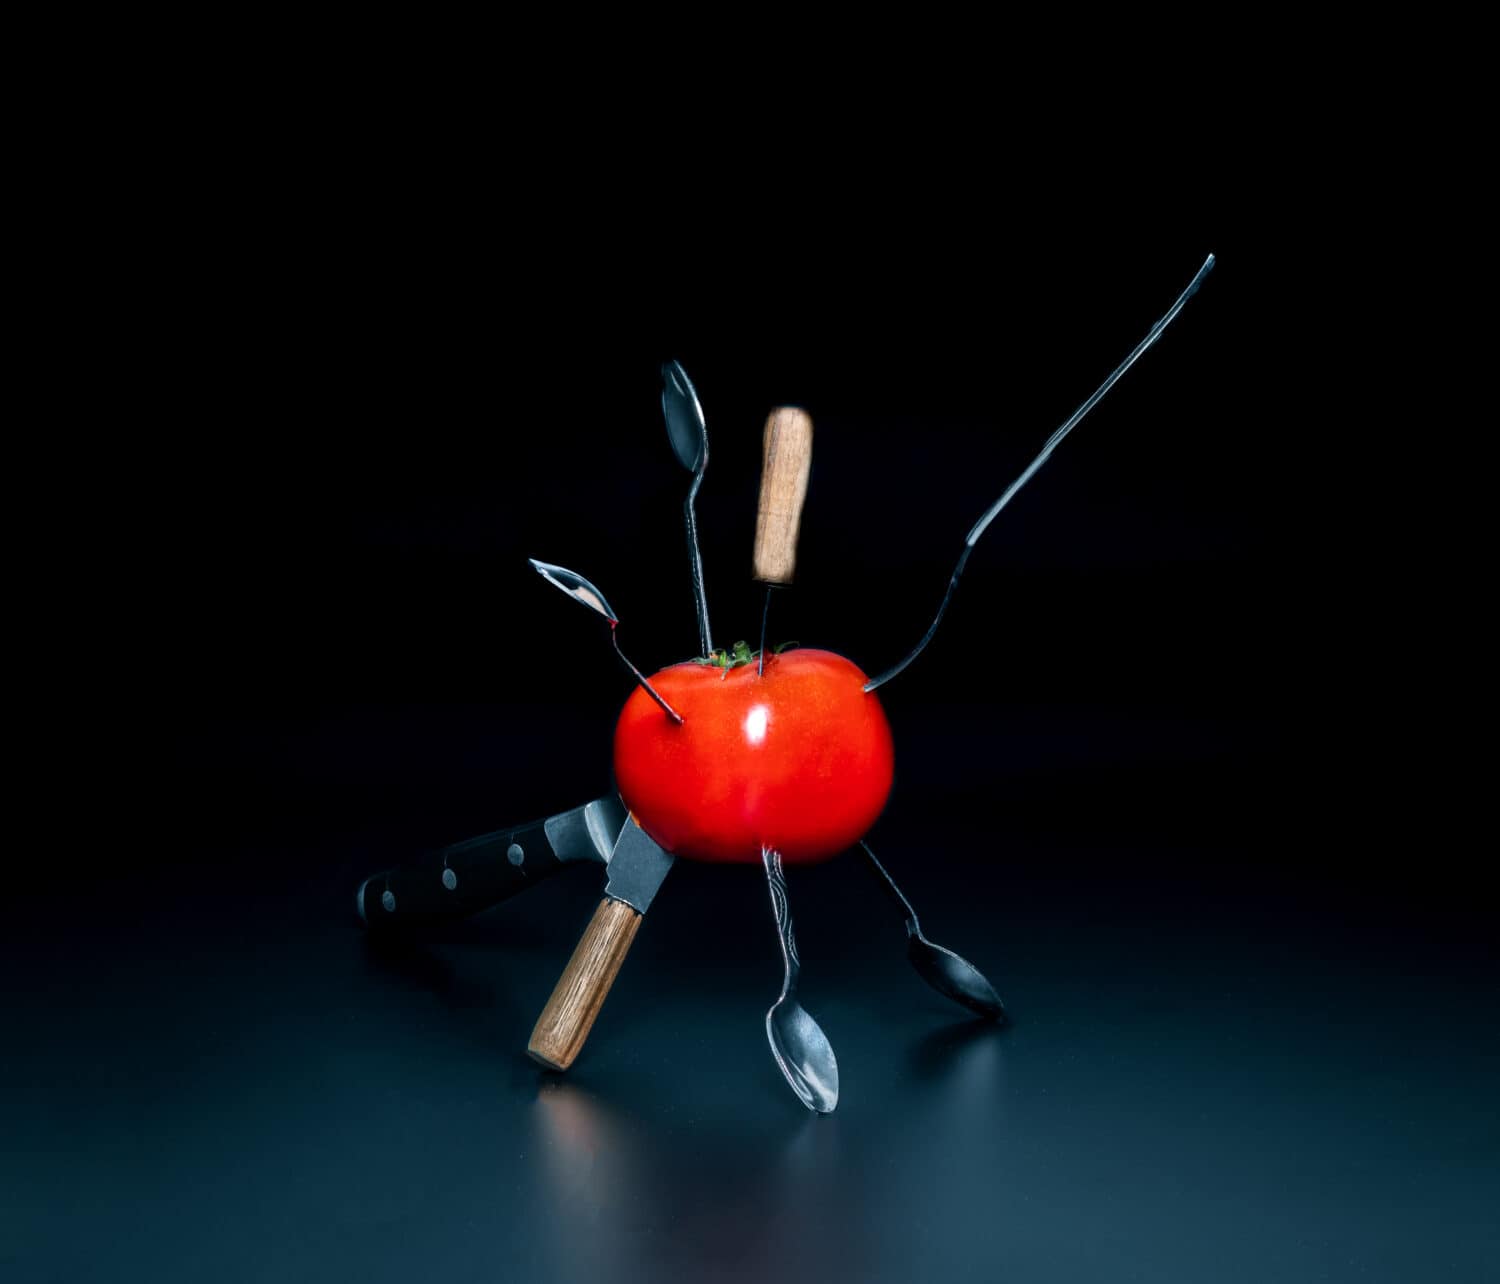 stabbed tomato with knifes, spoons and fork on black background